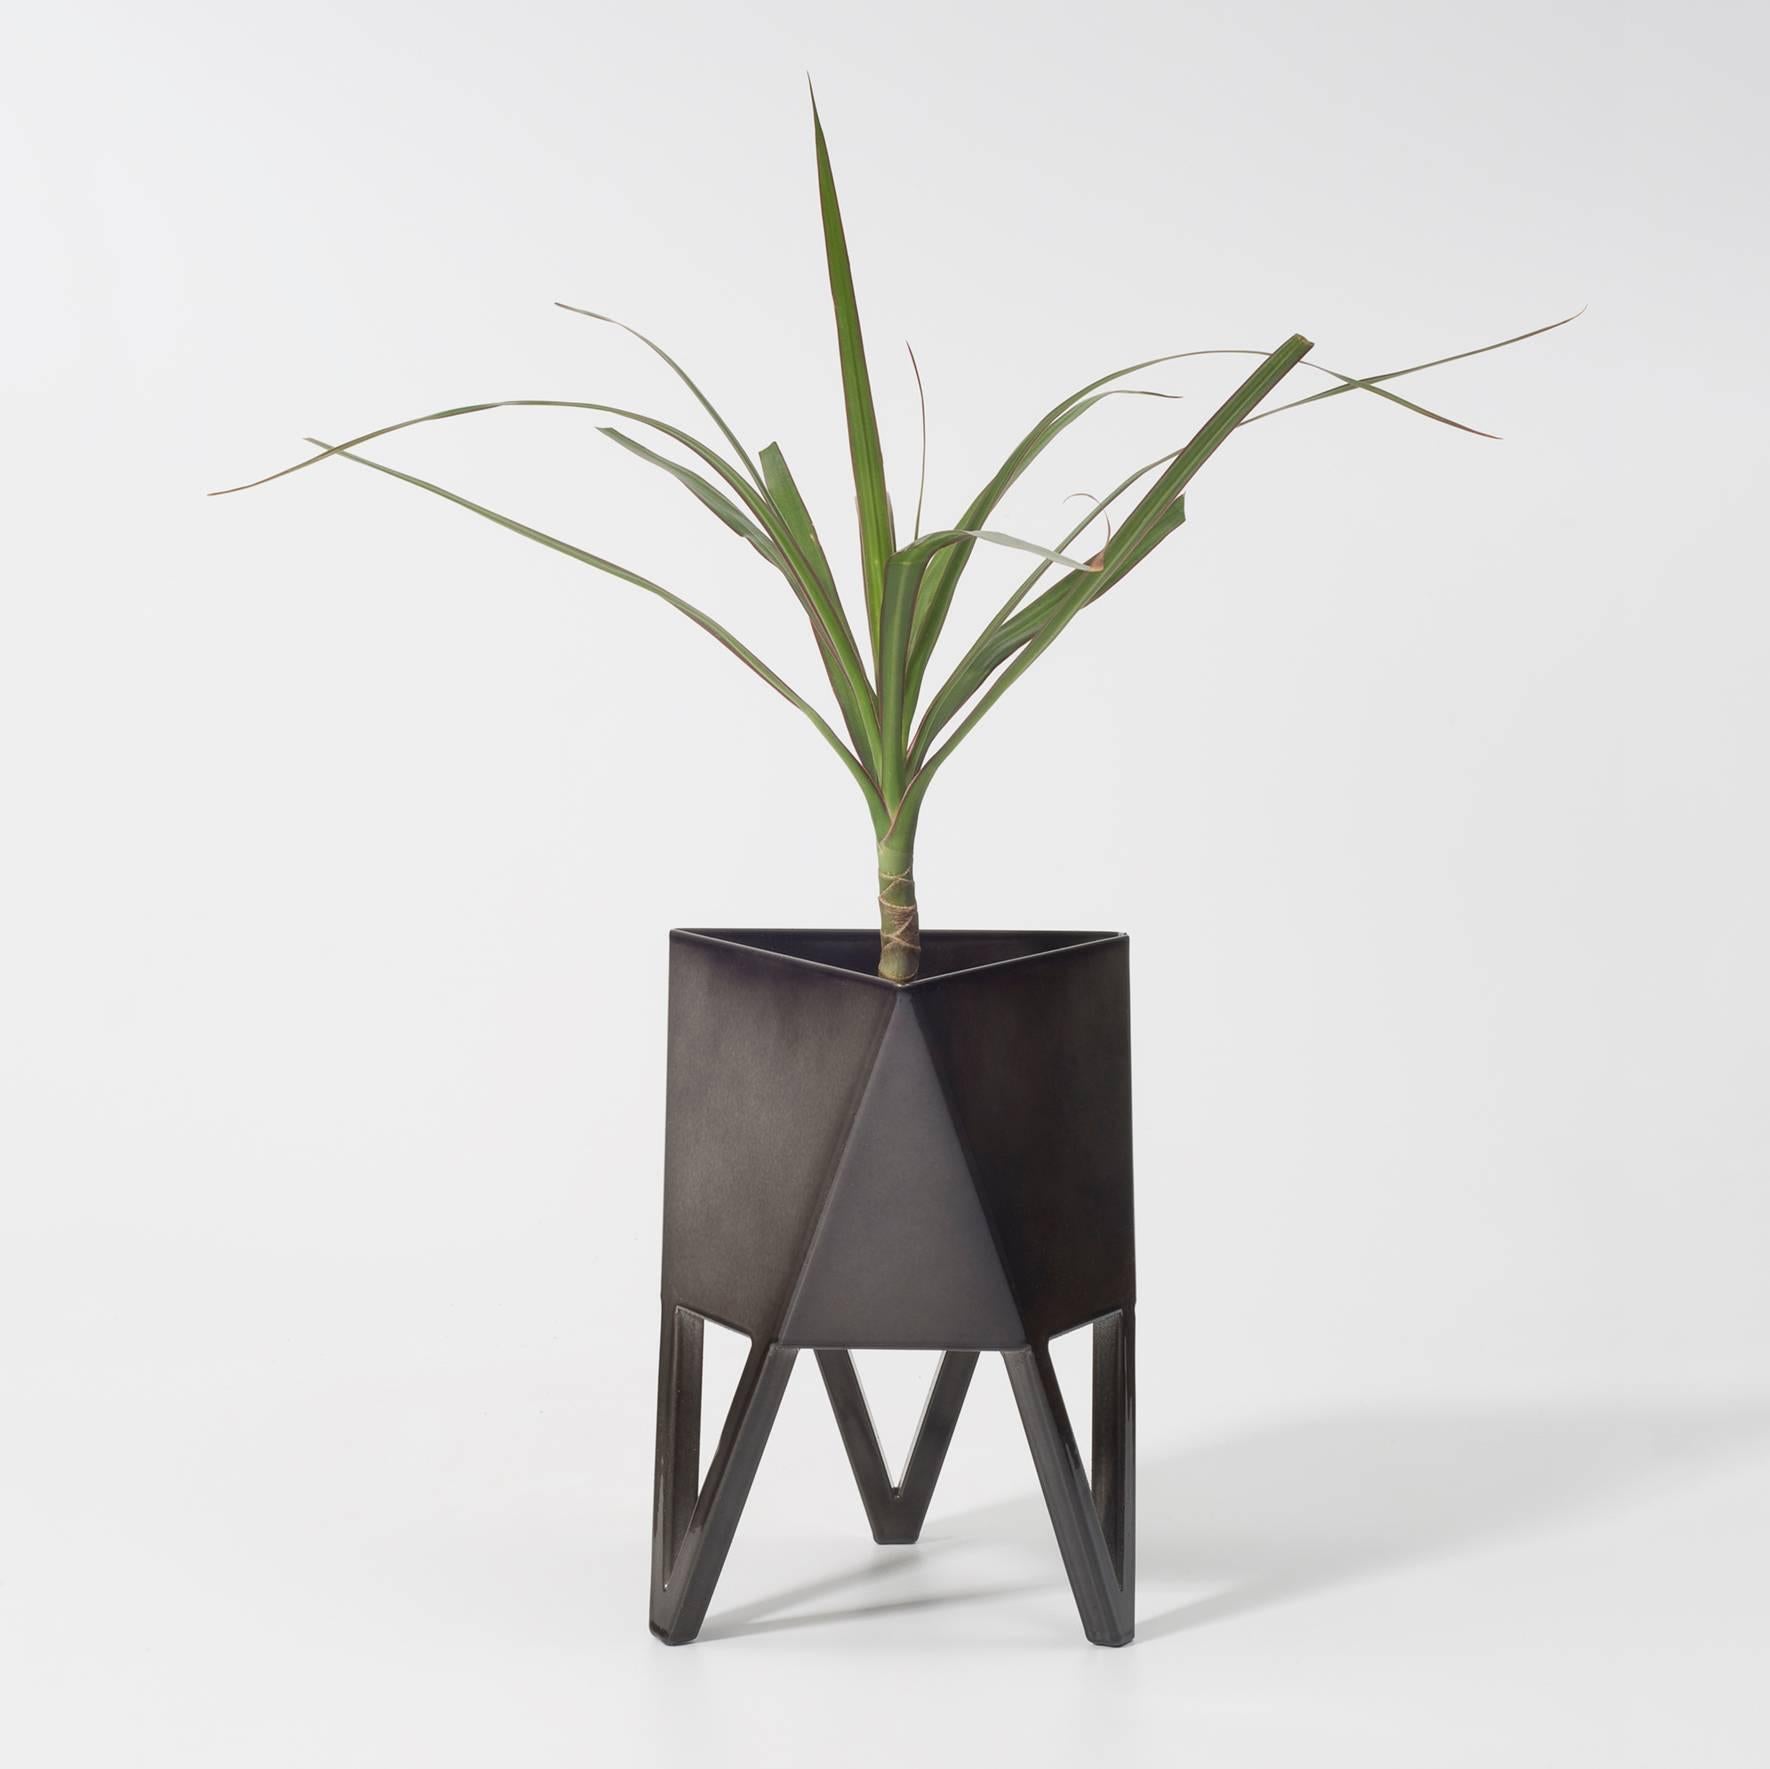 Deca Planter, Pastel Green Steel, Small, by Force/Collide 4